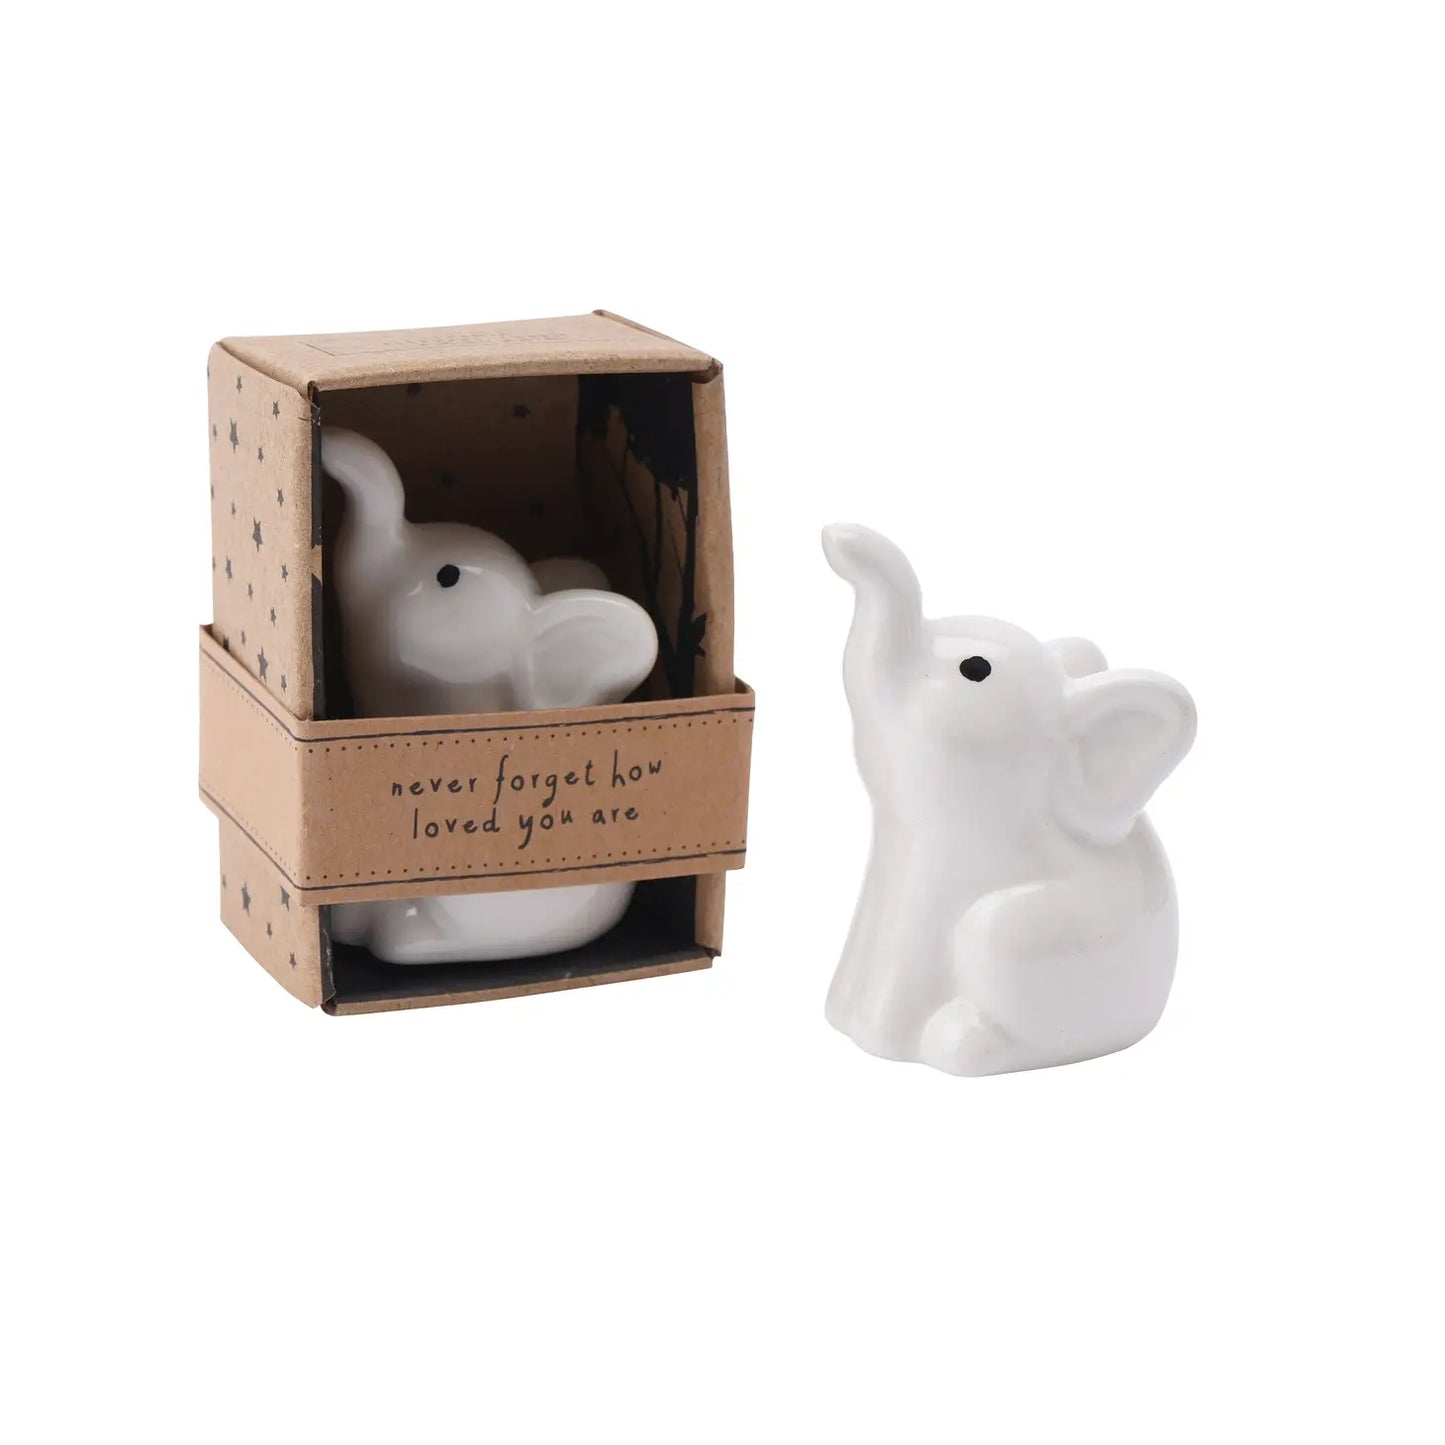 Send with Love Ceramic Elephant ornament - gift boxed. Birthday/Christmas present